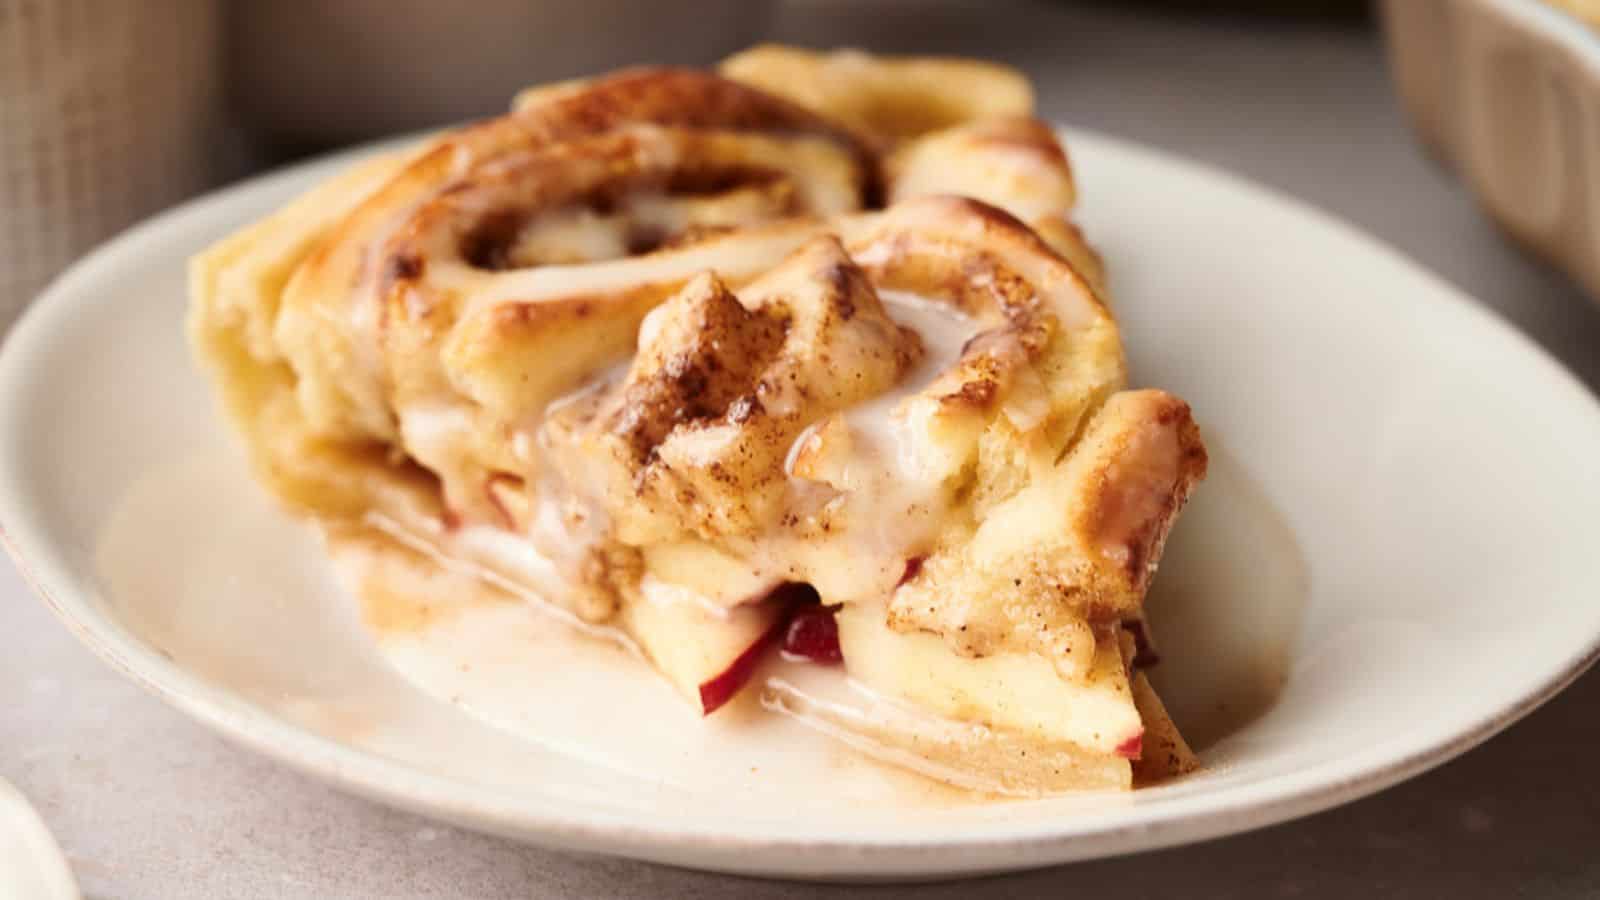 <p>Enjoy the flavors of a classic dessert with our Cinnamon Roll Apple Pie. It’s a dessert masterpiece that’s surprisingly easy to put together. A delightful treat with minimal effort.<br><strong>Get the Recipe: </strong><a href="https://www.splashoftaste.com/cinnamon-roll-apple-pie/?utm_source=msn&utm_medium=page&utm_campaign=msn">Cinnamon Roll Apple Pie</a></p>